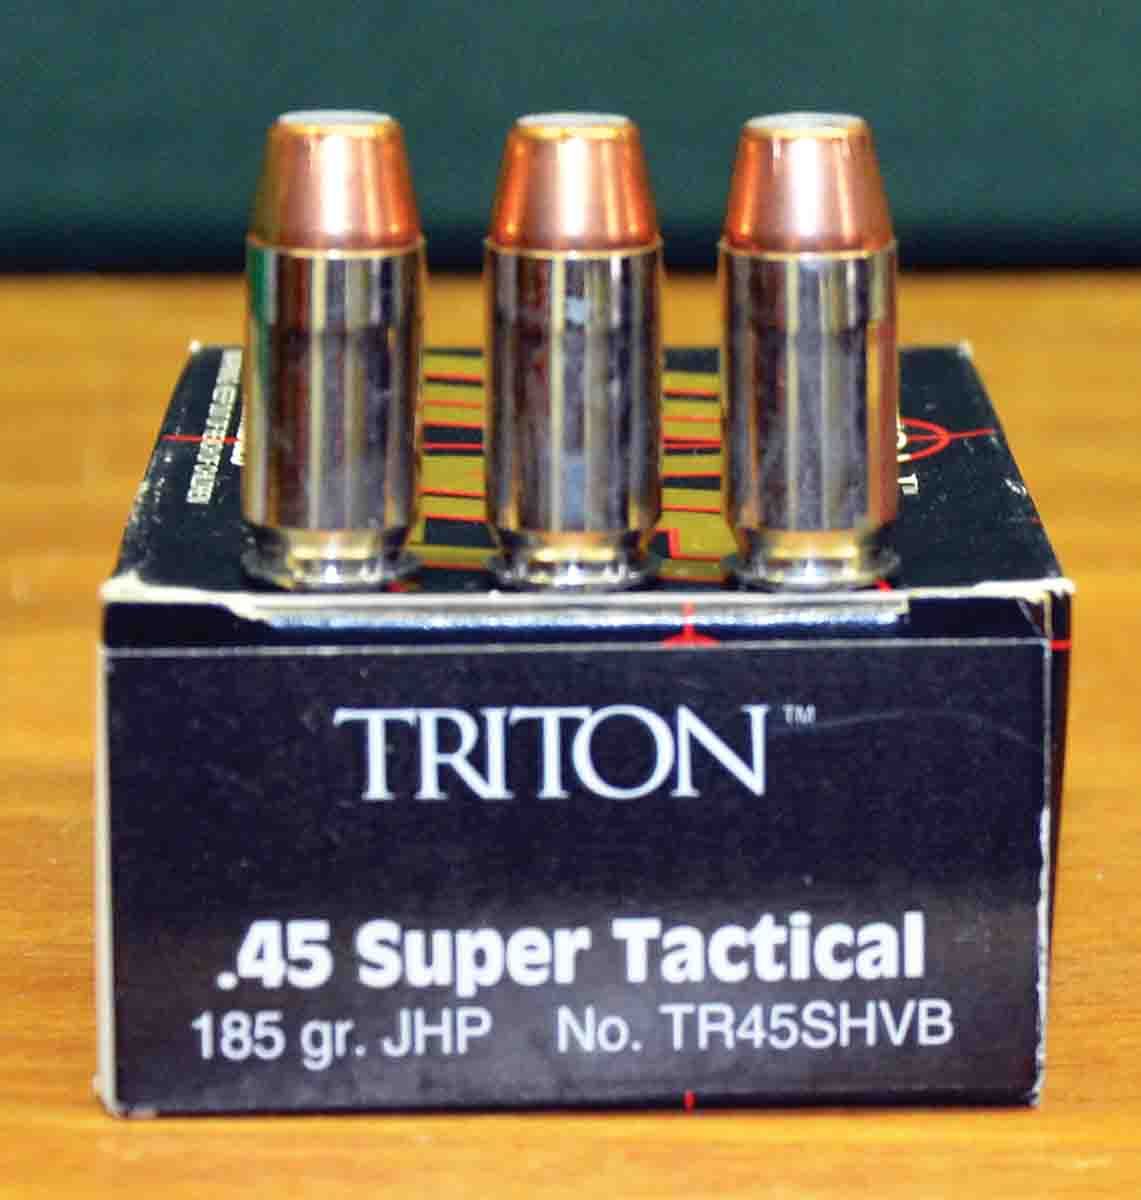 Triton Cartridge company was the first to offer .45 Super ammunition and load data for it. When the company switched from a large pistol primer to a small rifle primer (both cases made by Starline) the cartridge was renamed .45 SMC. Loaded .45 Super ammunition is available from Buffalo Bore.